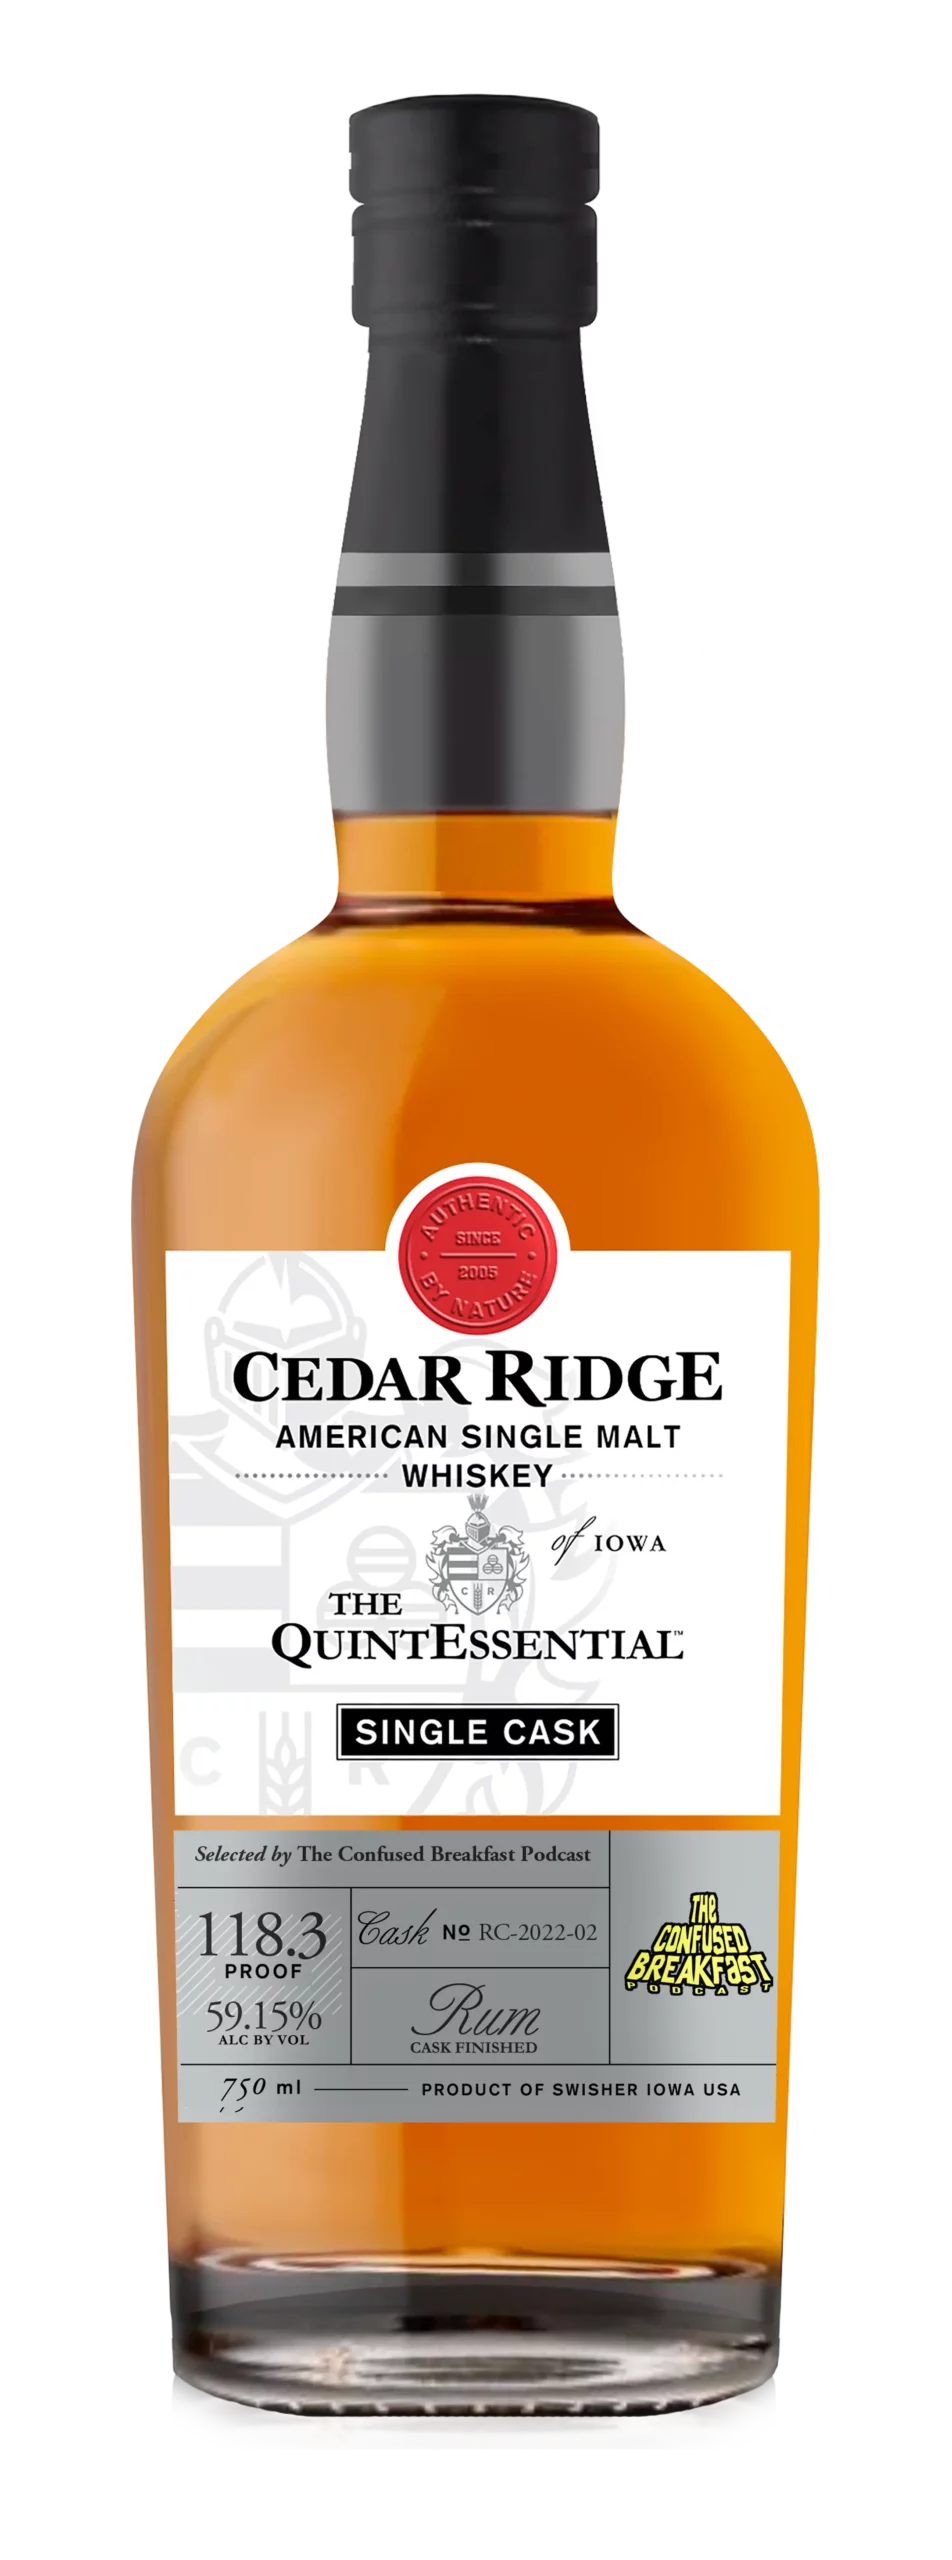 The QuintEssential, American Single Malt Whiskey - Single Cask | Selected by The Confused Breakfast Podcast